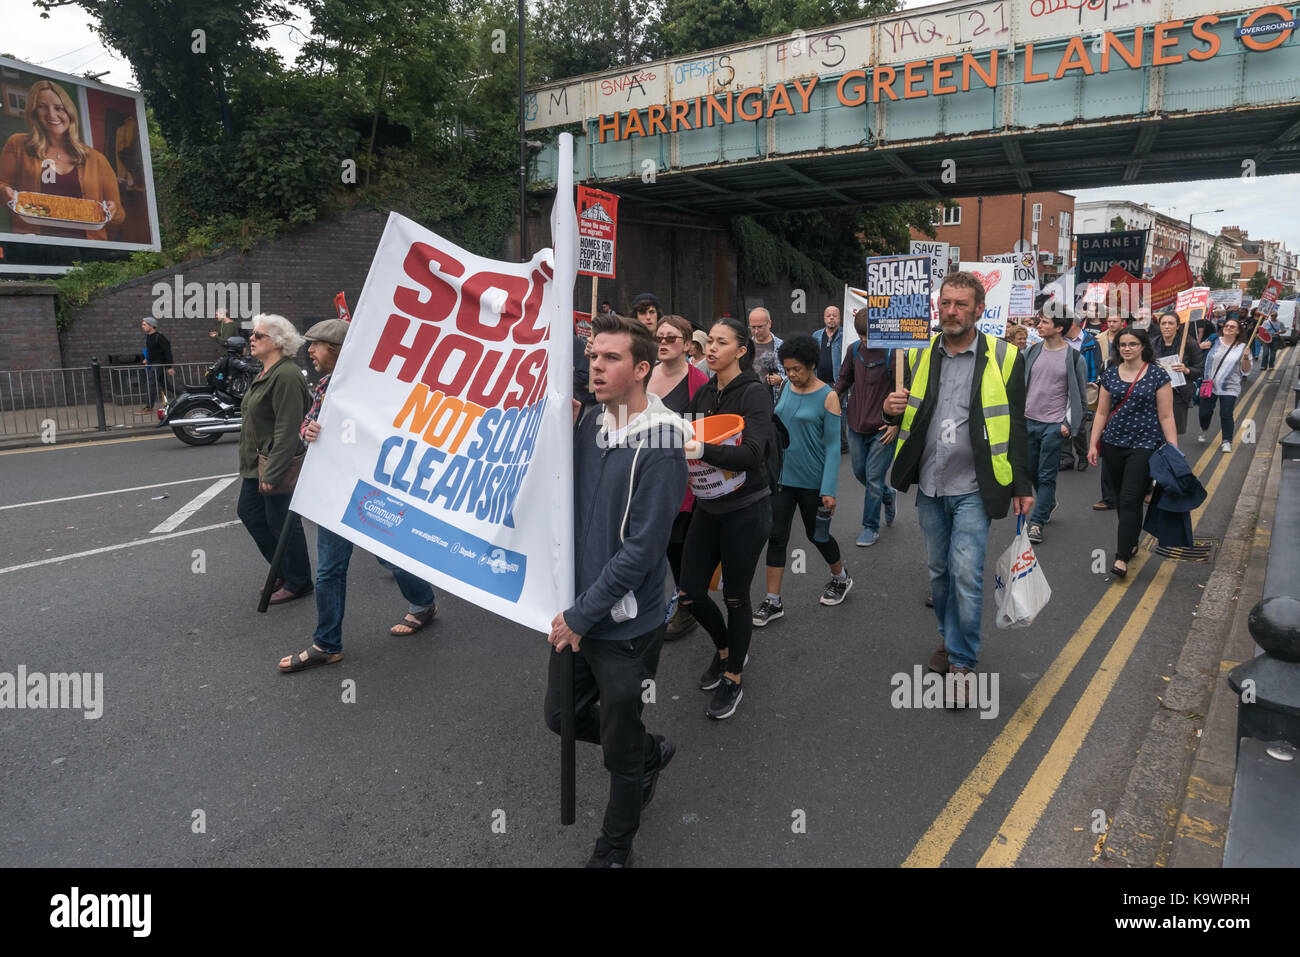 London, UK. 23rd Sep, 2017. London, UK. 23rd September 2017. Hundreds march in North London from a rally in Tottenham to Finsbury Park against the so called Haringey Development Vehicle, under which Haringey Council is making a huge transfer of council housing to Australian multinational Lendlease. This will result in the imminent demolition of over 1,300 council homes on the Northumberland Park estate, followed by similar loss of social housing across the whole of the borough. At Â£2 billion, his is the largest giveaway of council housing and assets to a private corporation yet in the U Stock Photo